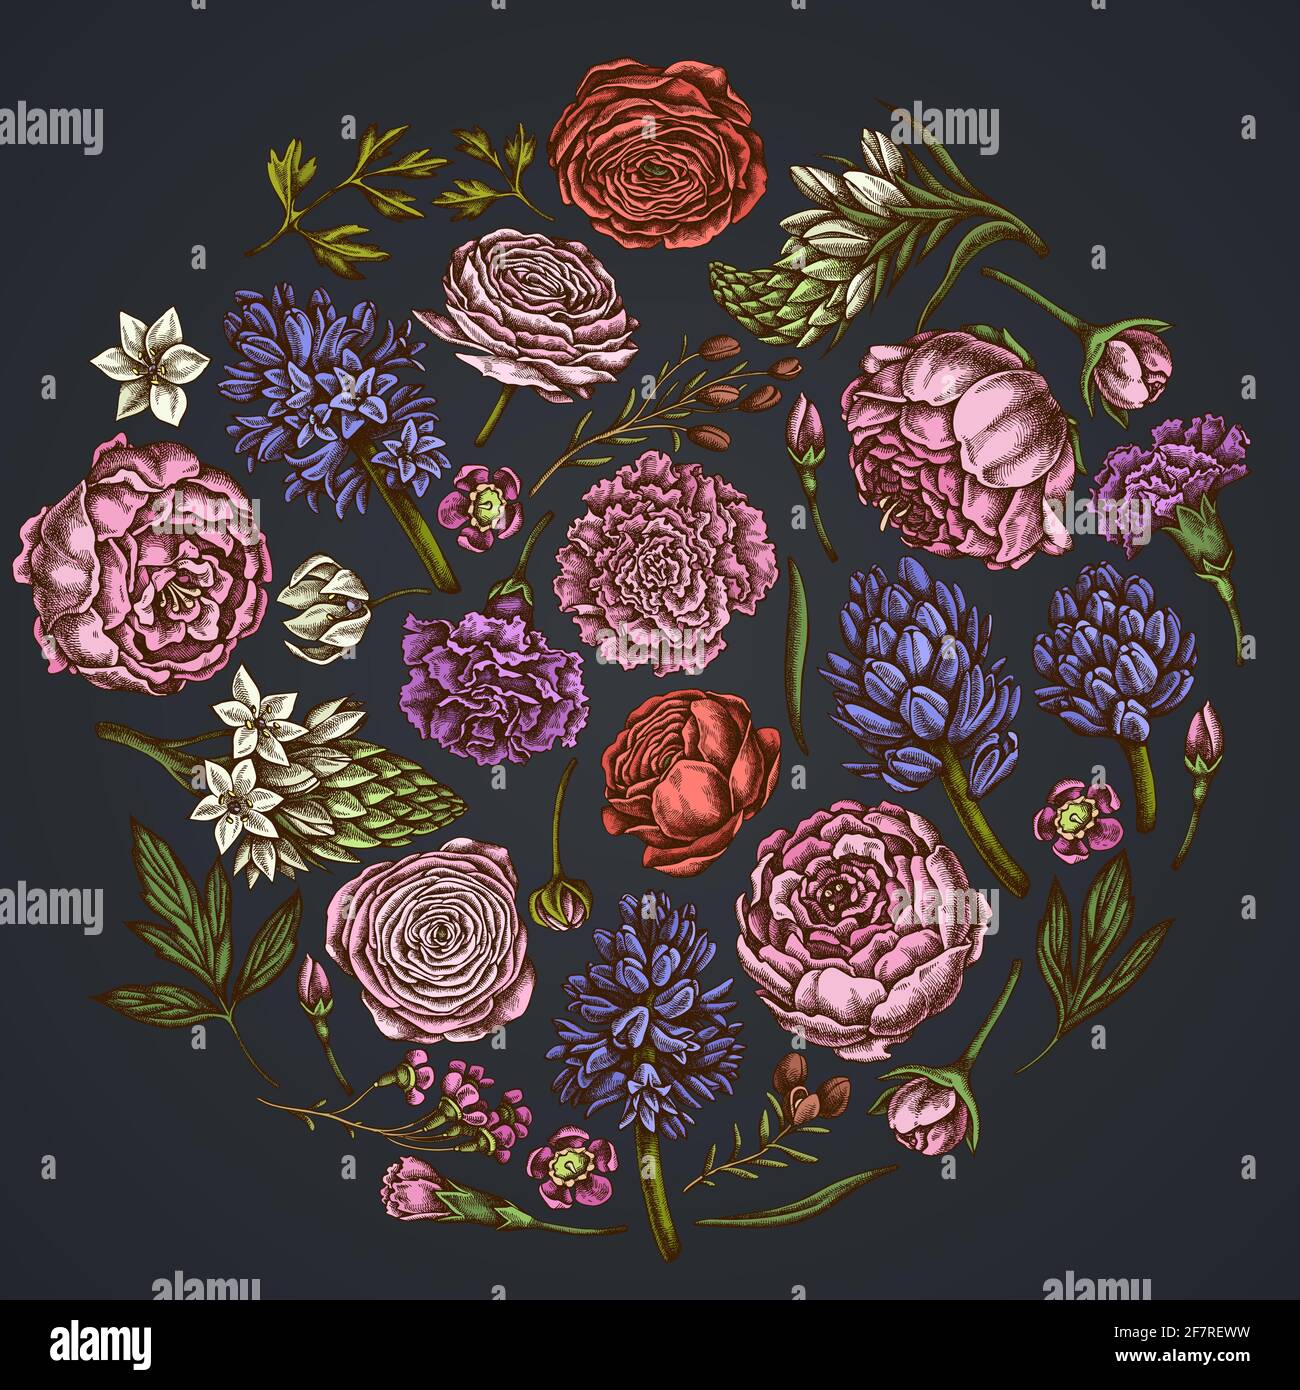 Round floral design on dark background with peony, carnation, ranunculus, wax flower, ornithogalum, hyacinth Stock Vector